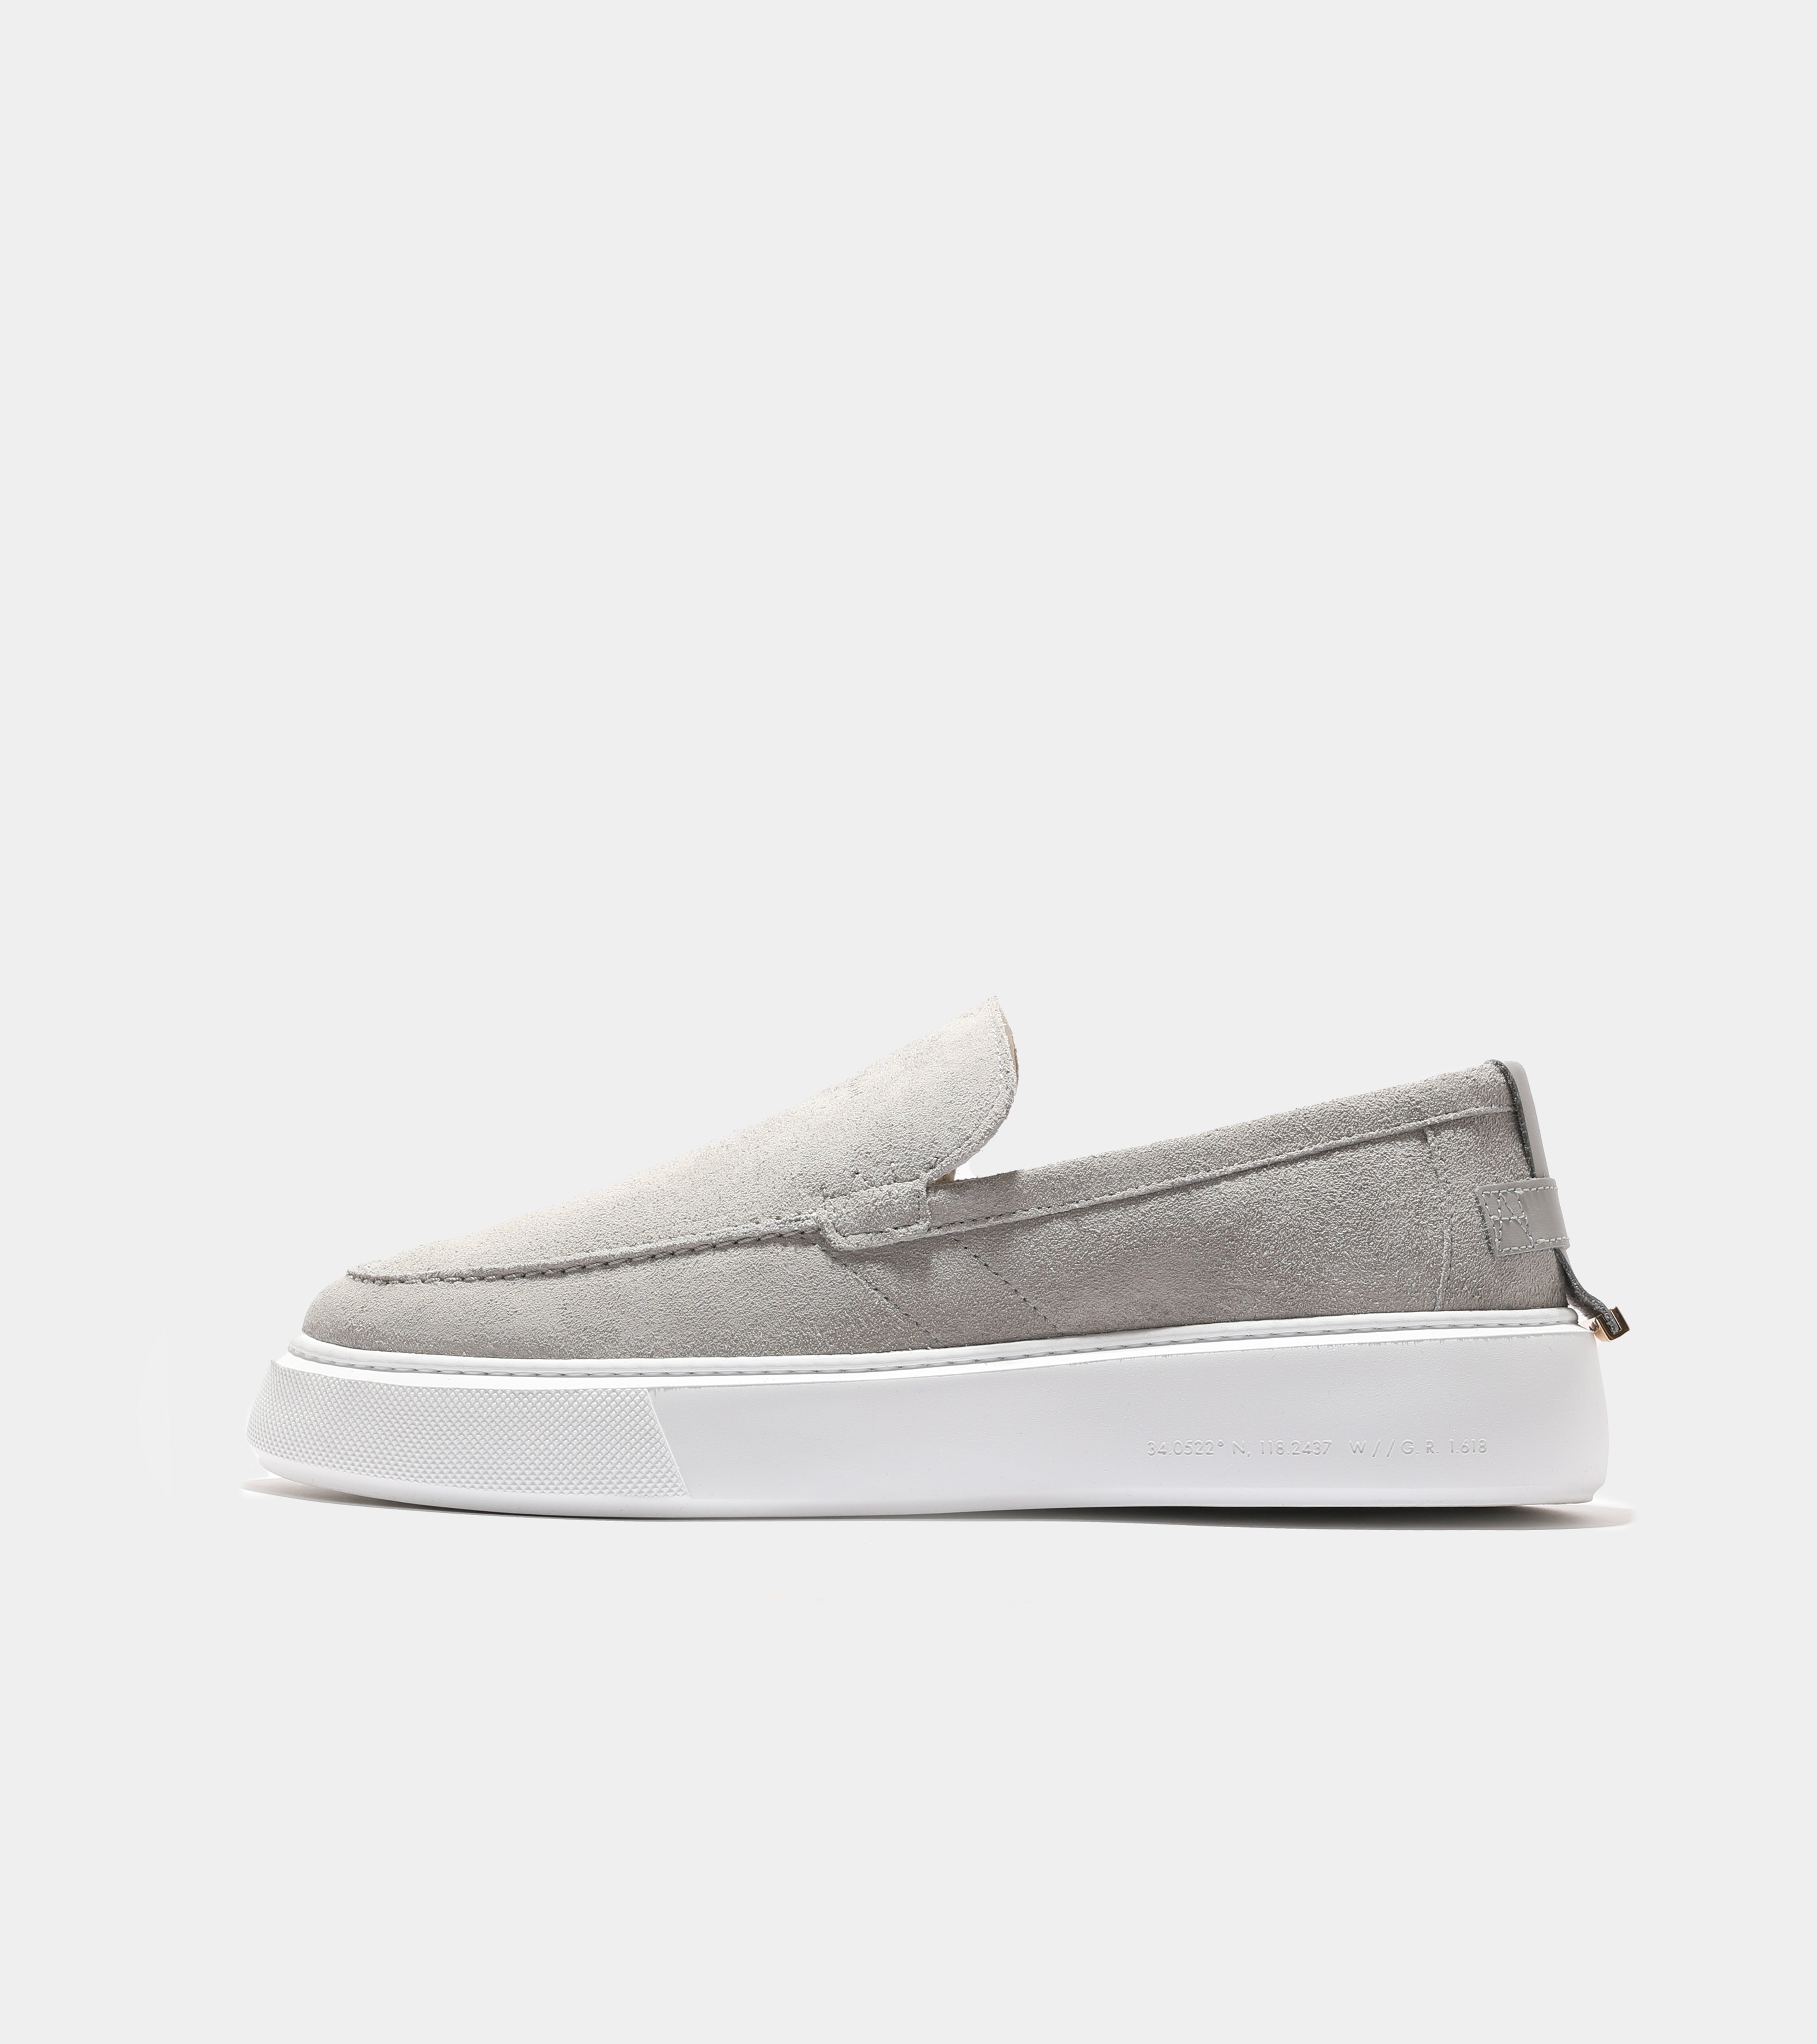 Oversized Loafer | Grey  Suede AHP244-04